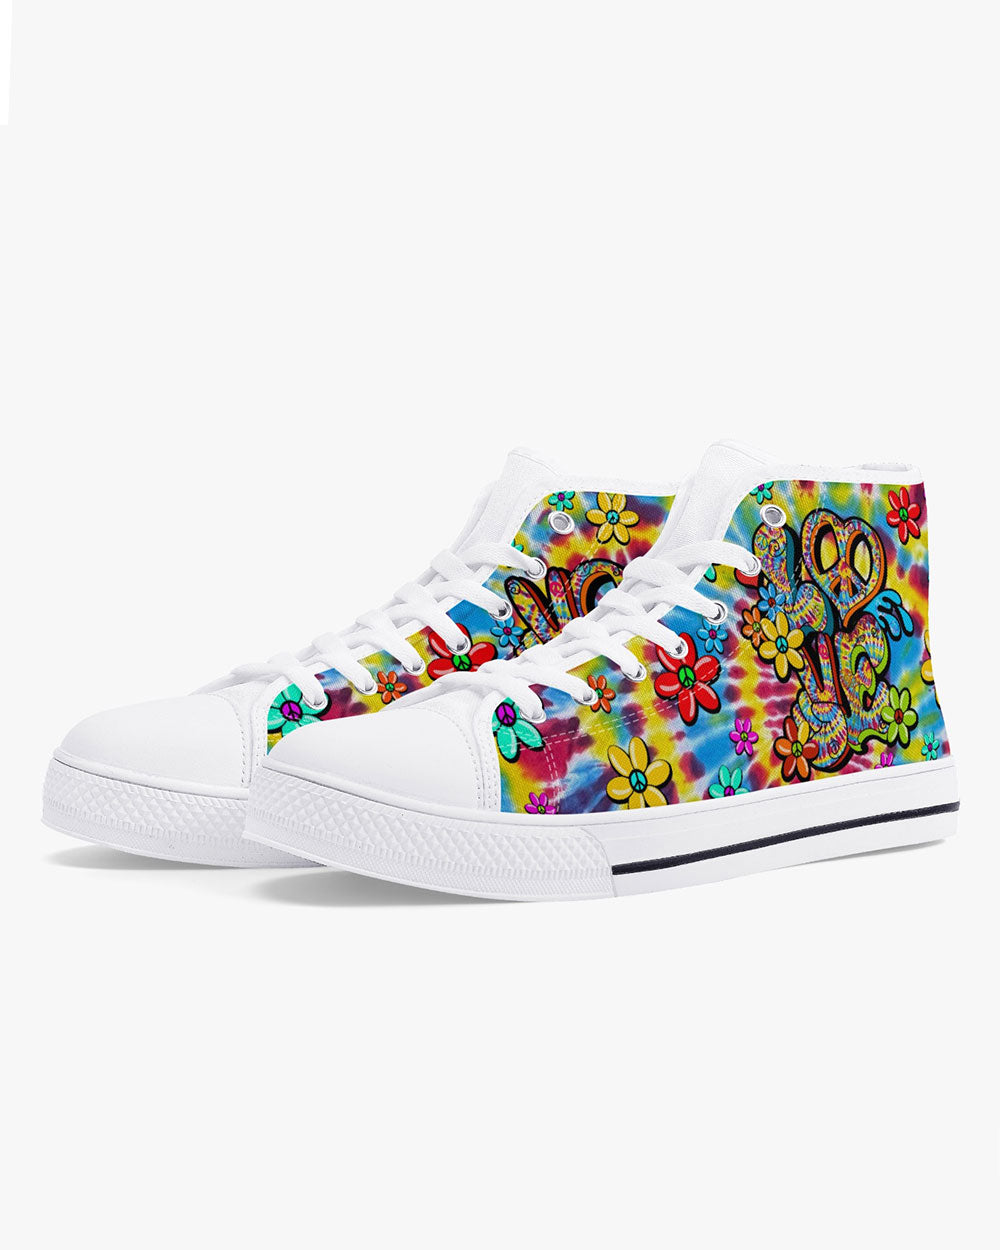 HIPPIE PEACE LOVE FLOWERS TIE DYE HIGH TOP CANVAS SHOES - TY0406245